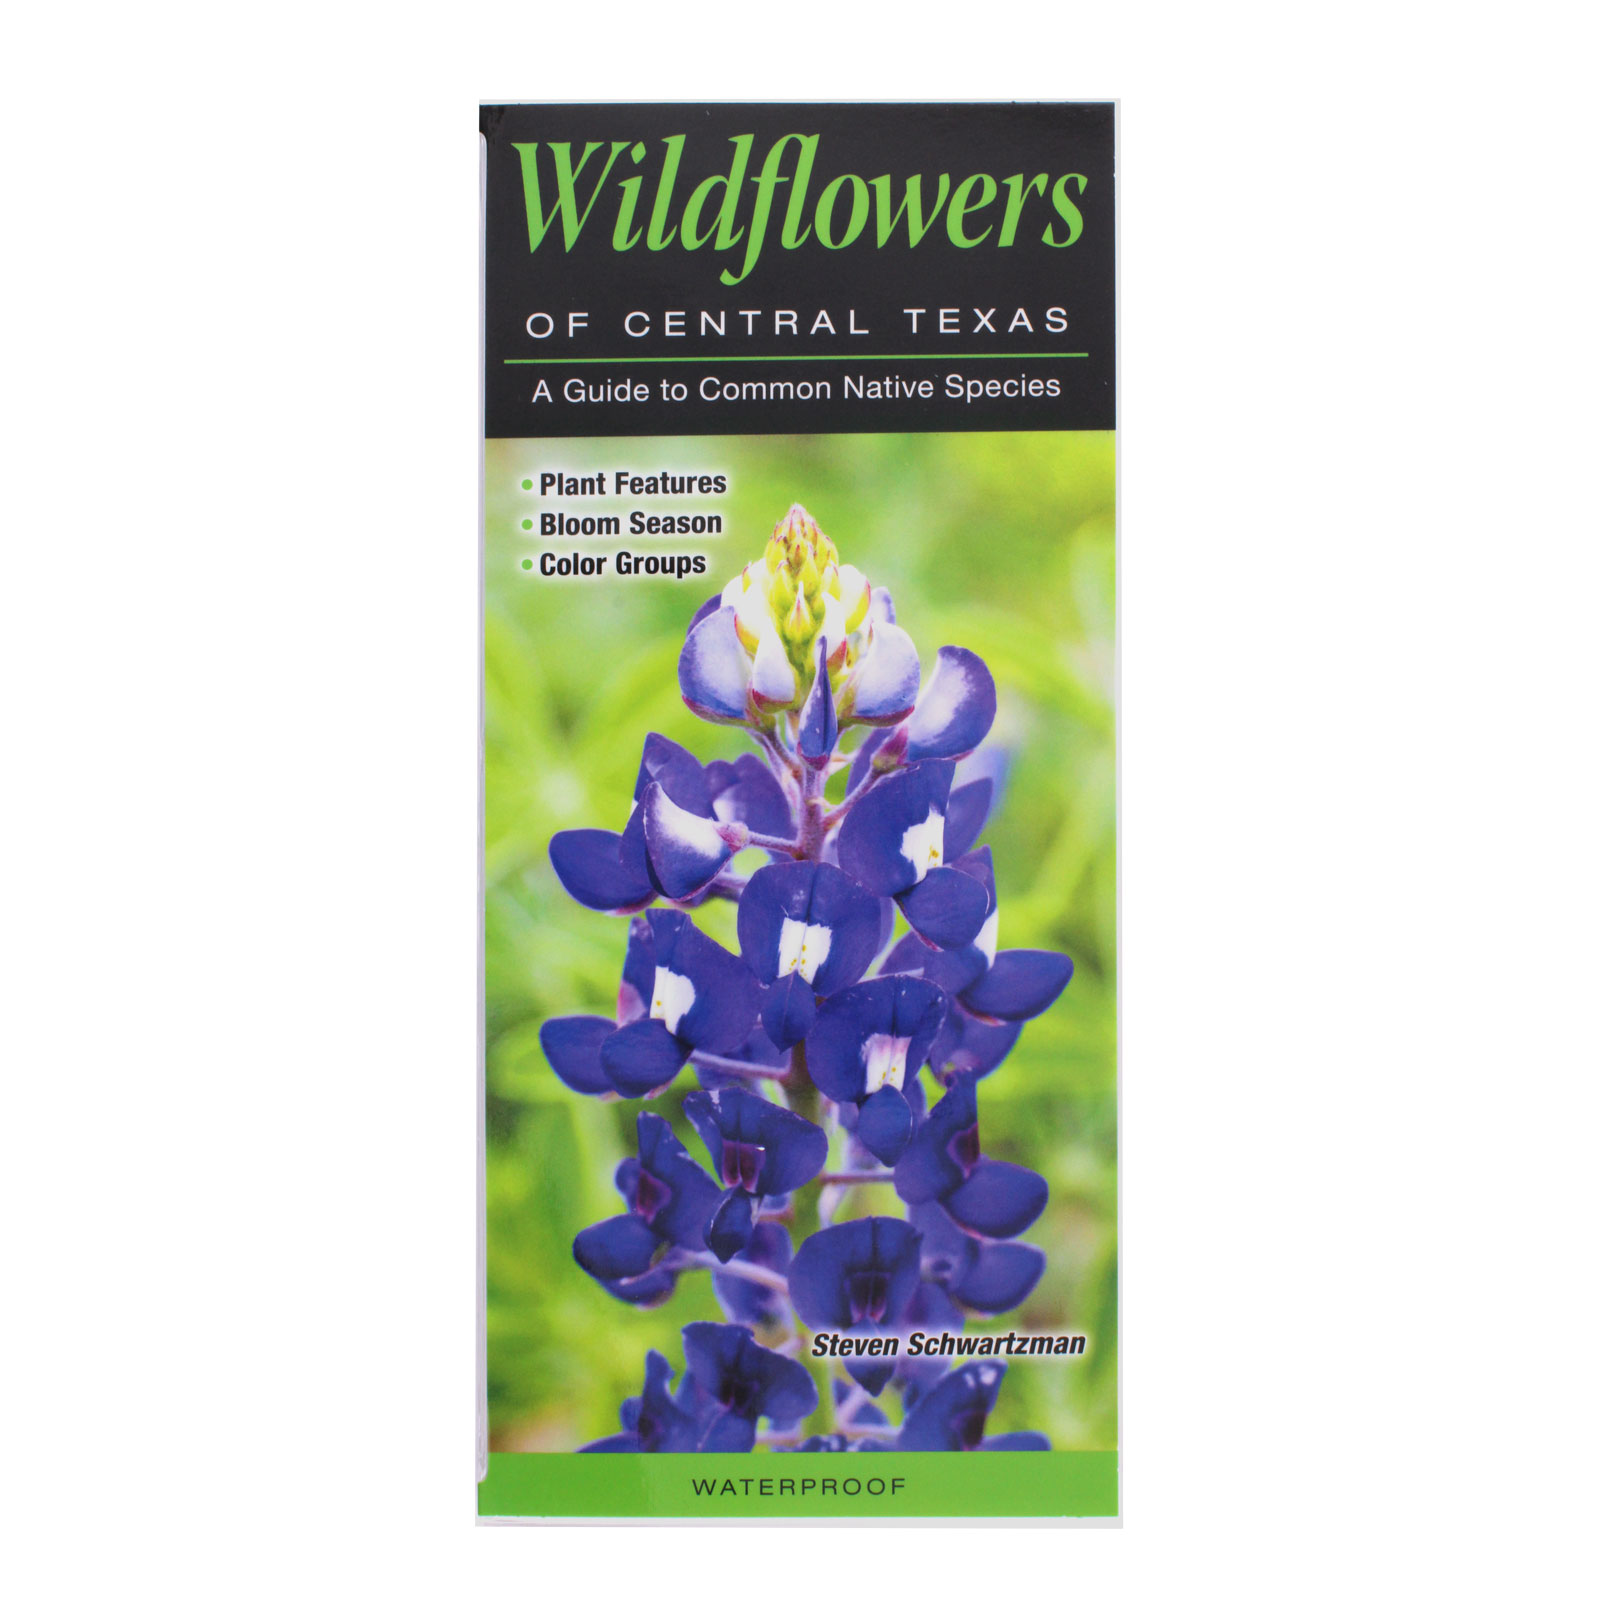 Wildflowers of Central Texas Reference Guide